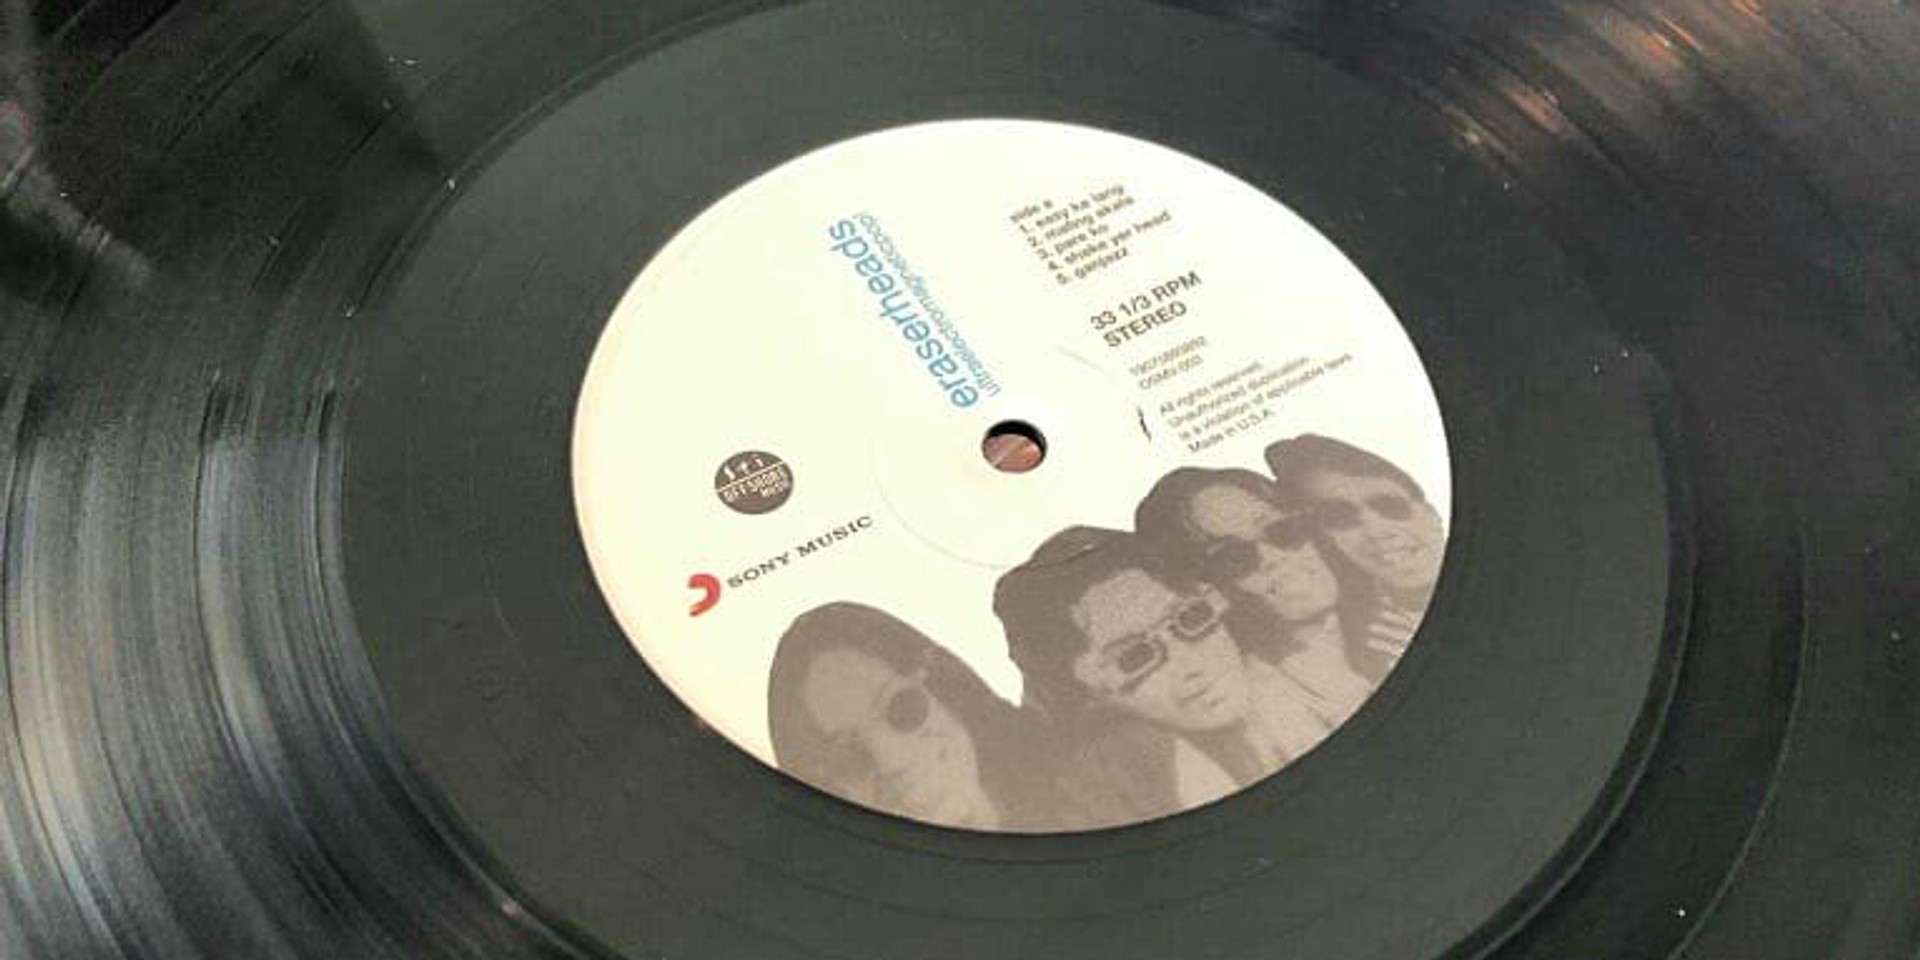 The Eraserheads' Ultraelectromagneticpop! 25th anniversary vinyl is finally here